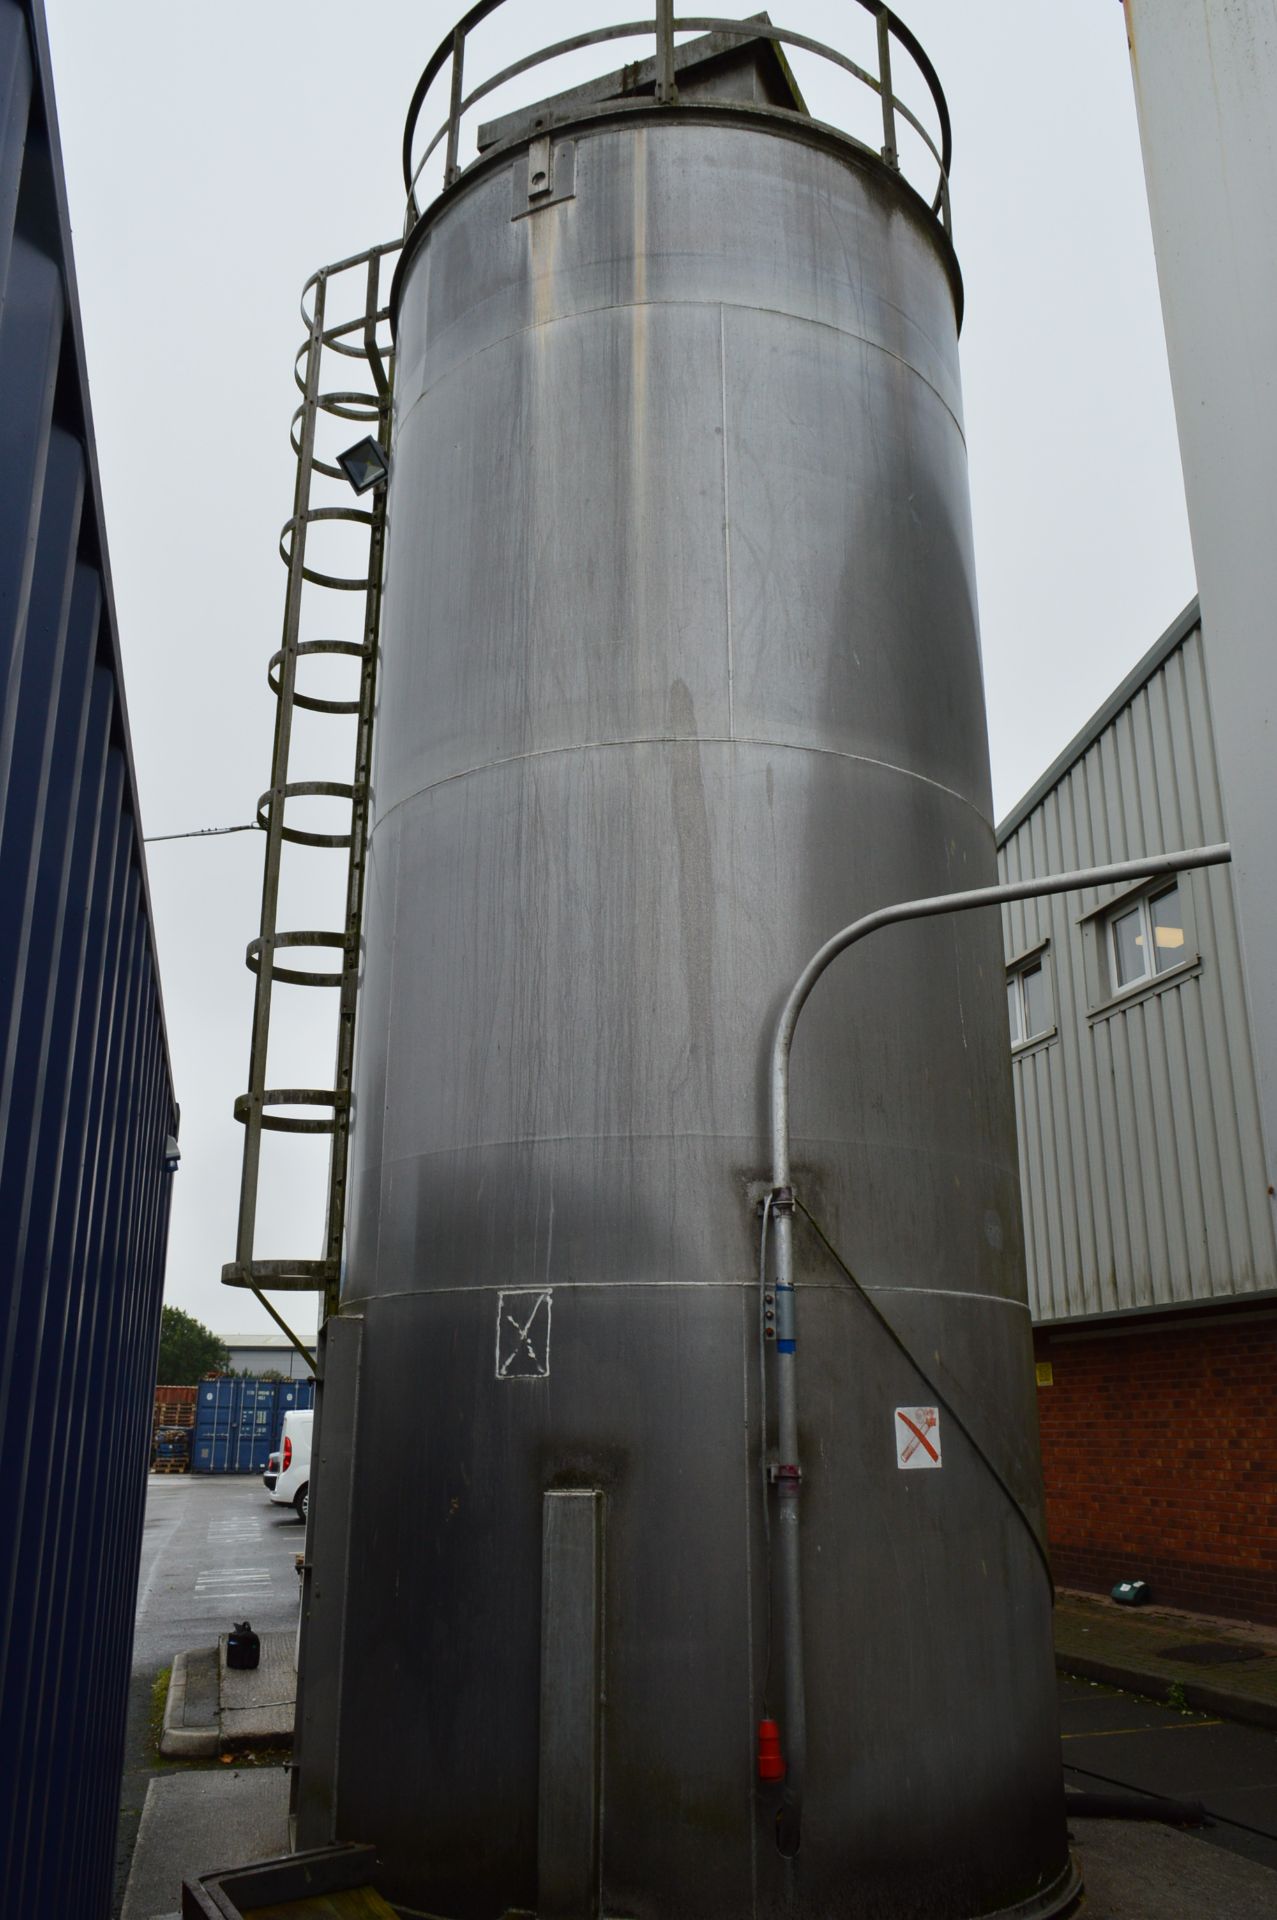 Scanflow Silos, stainless steel storage silo (Located at Crantock Bakery, Newquay) - Image 2 of 2